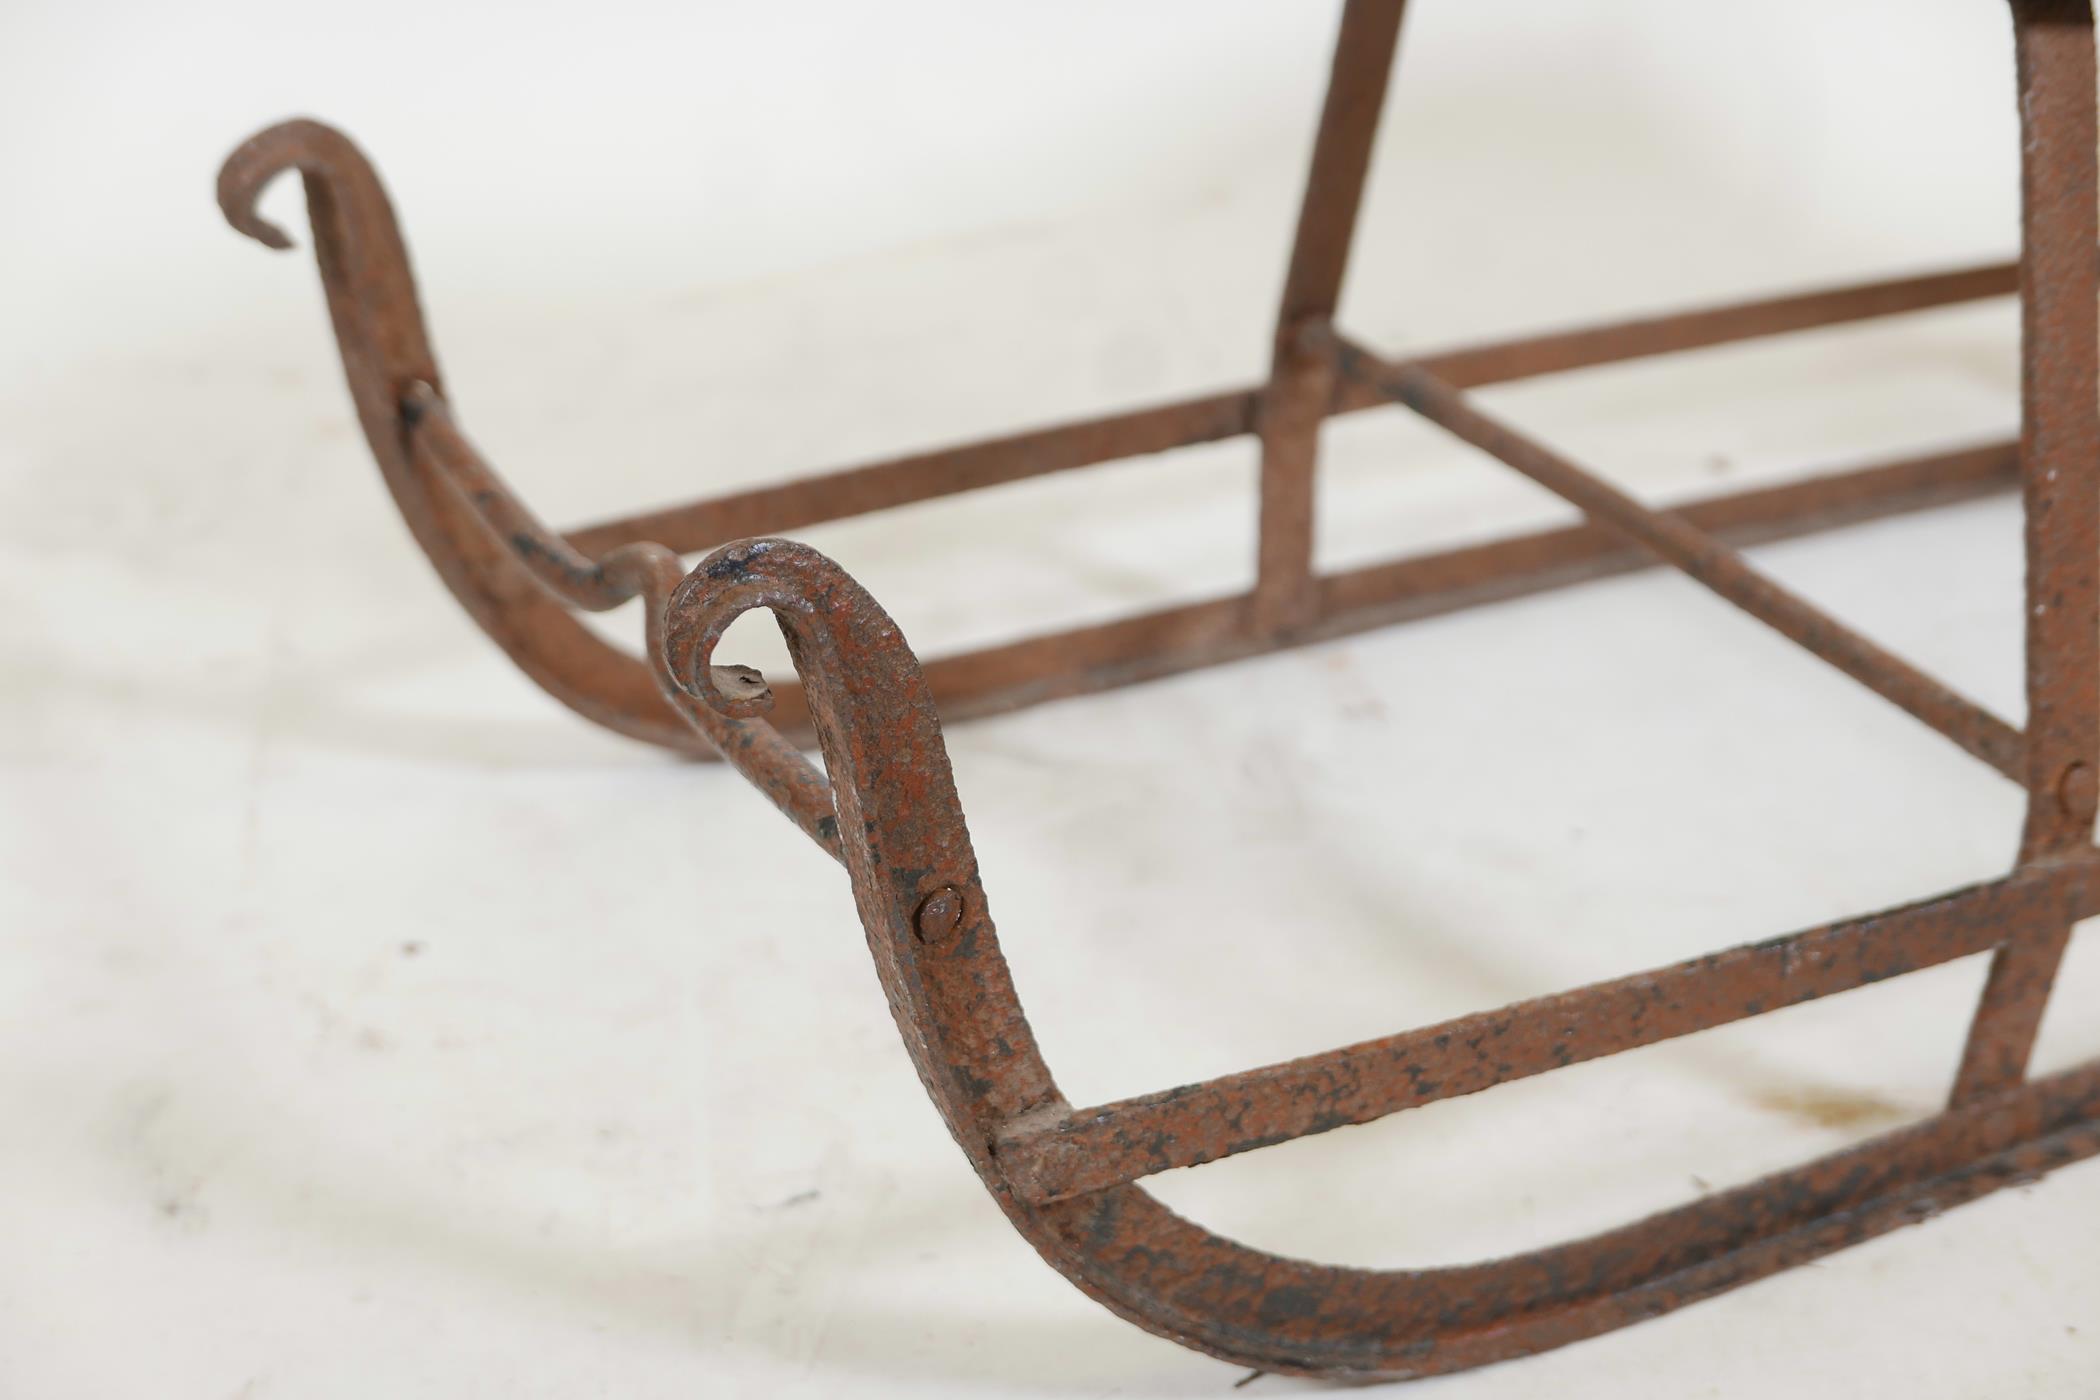 An antique child's sled, wrought iron with a wood seat, 32" x 20"high - Image 3 of 3